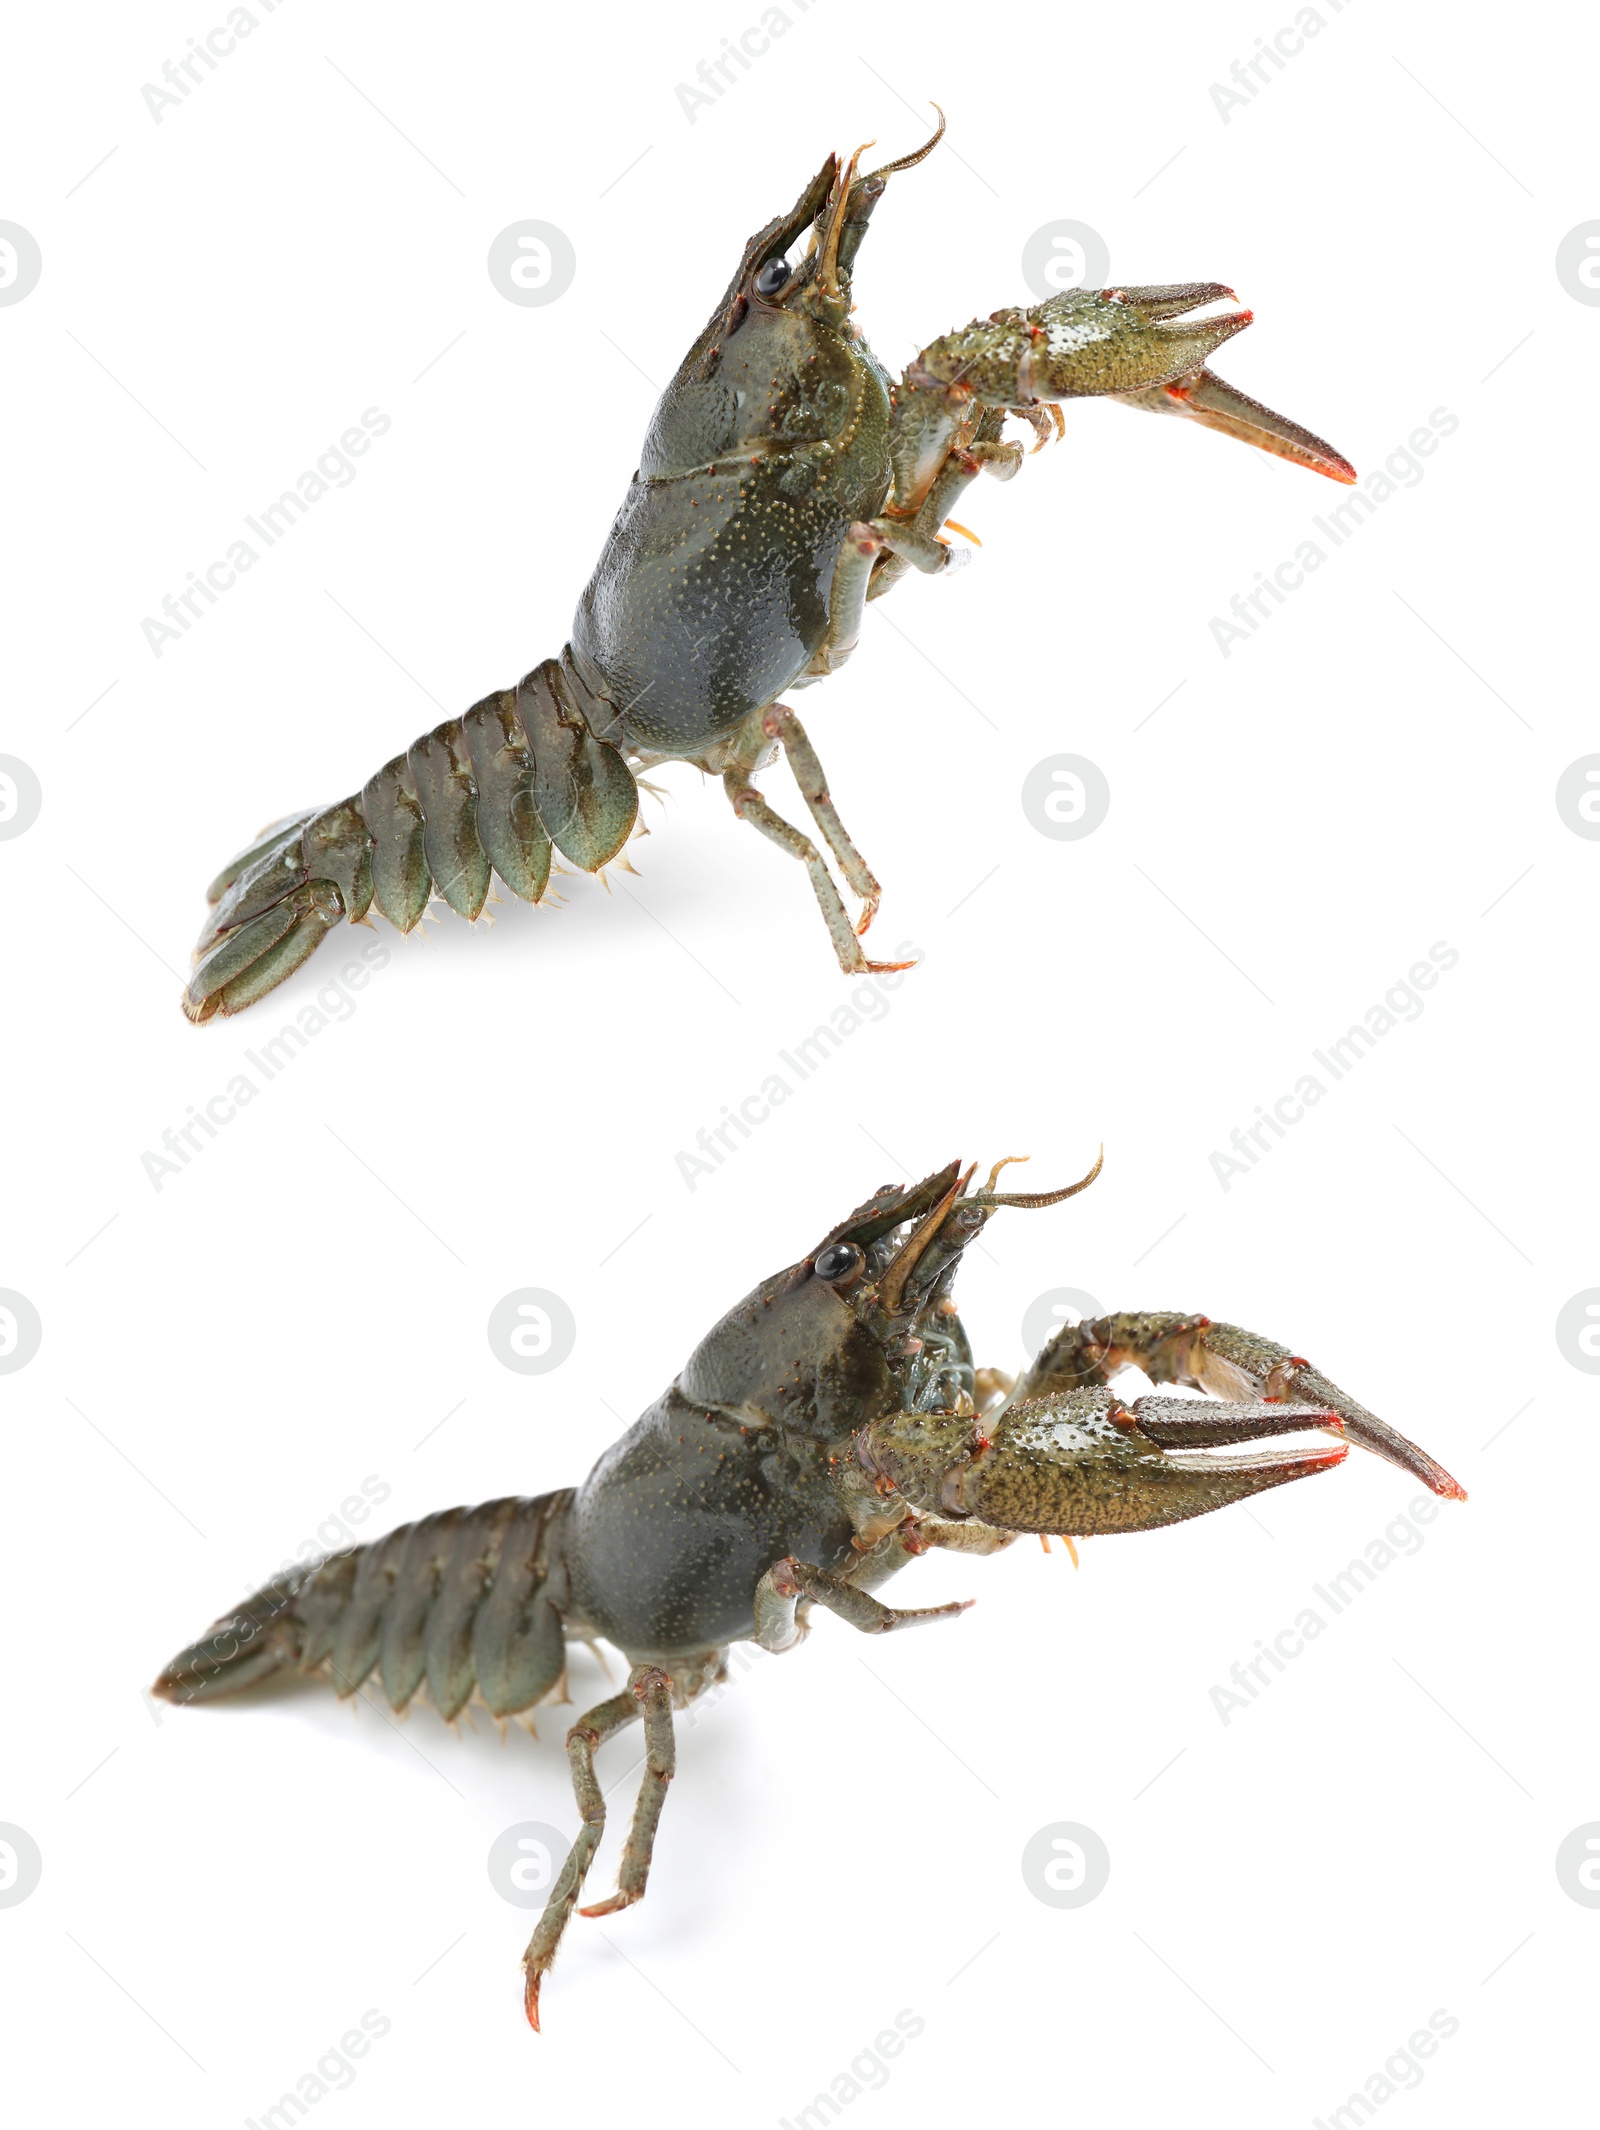 Image of Collage with two fresh crayfishes on white background